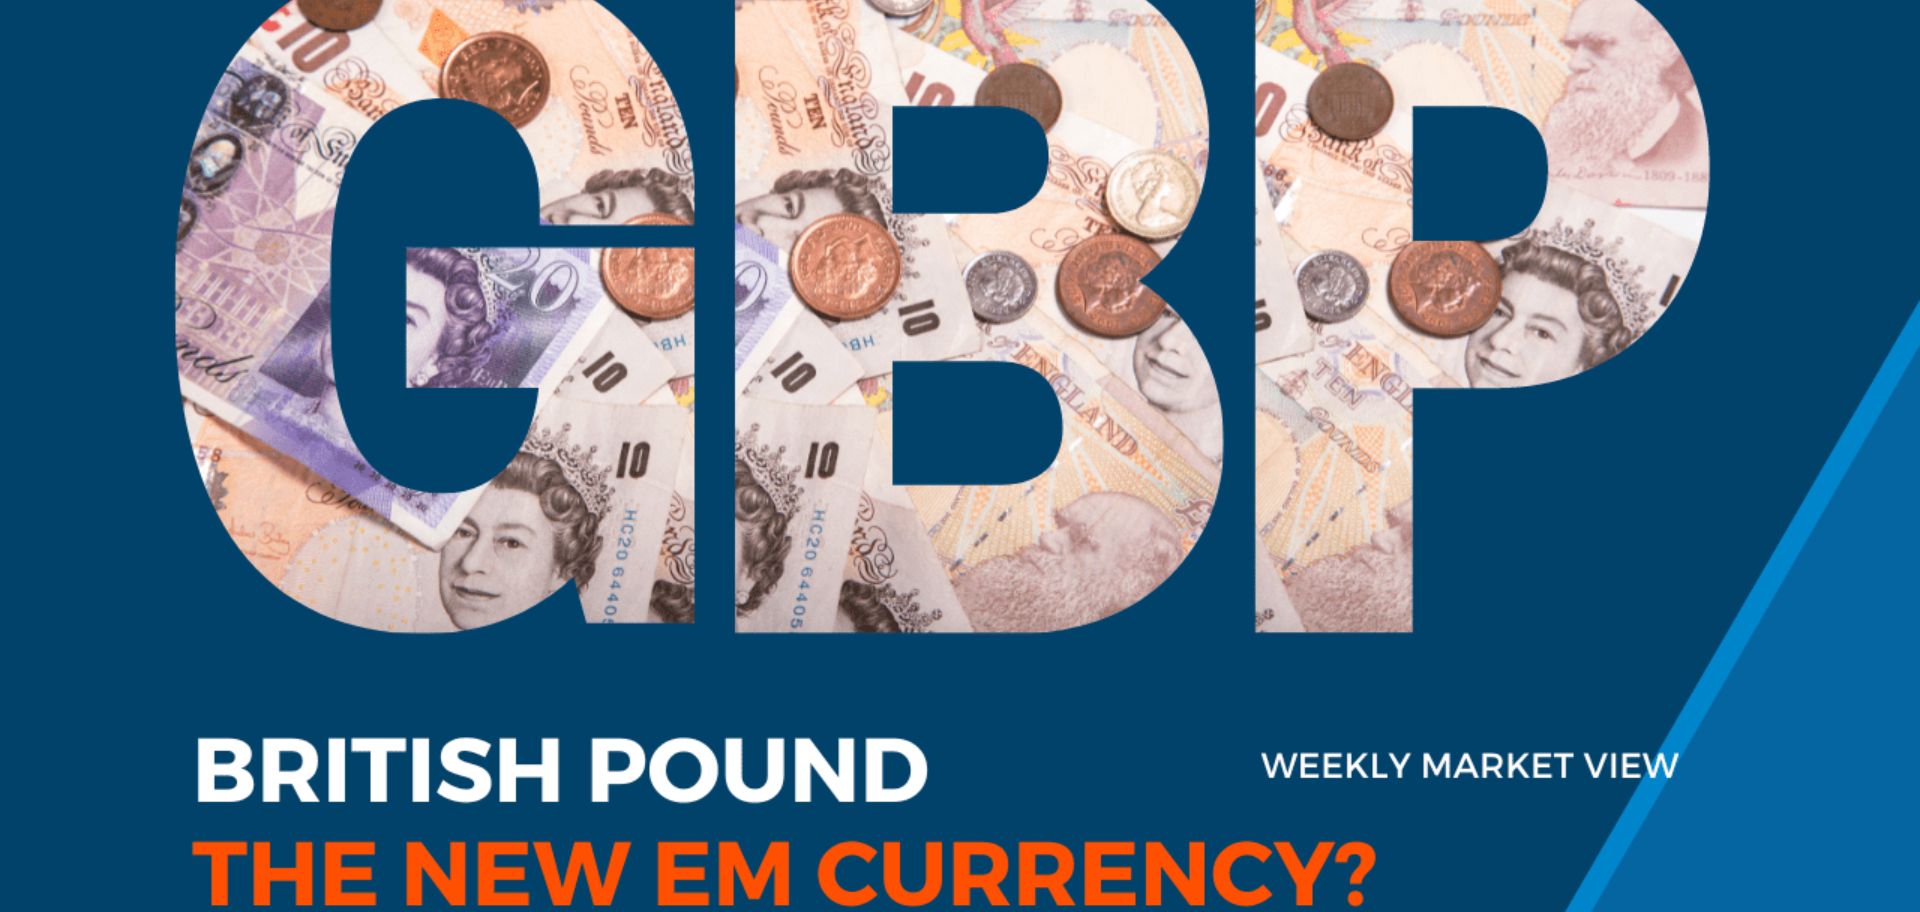 British pound: the new emerging market currency?